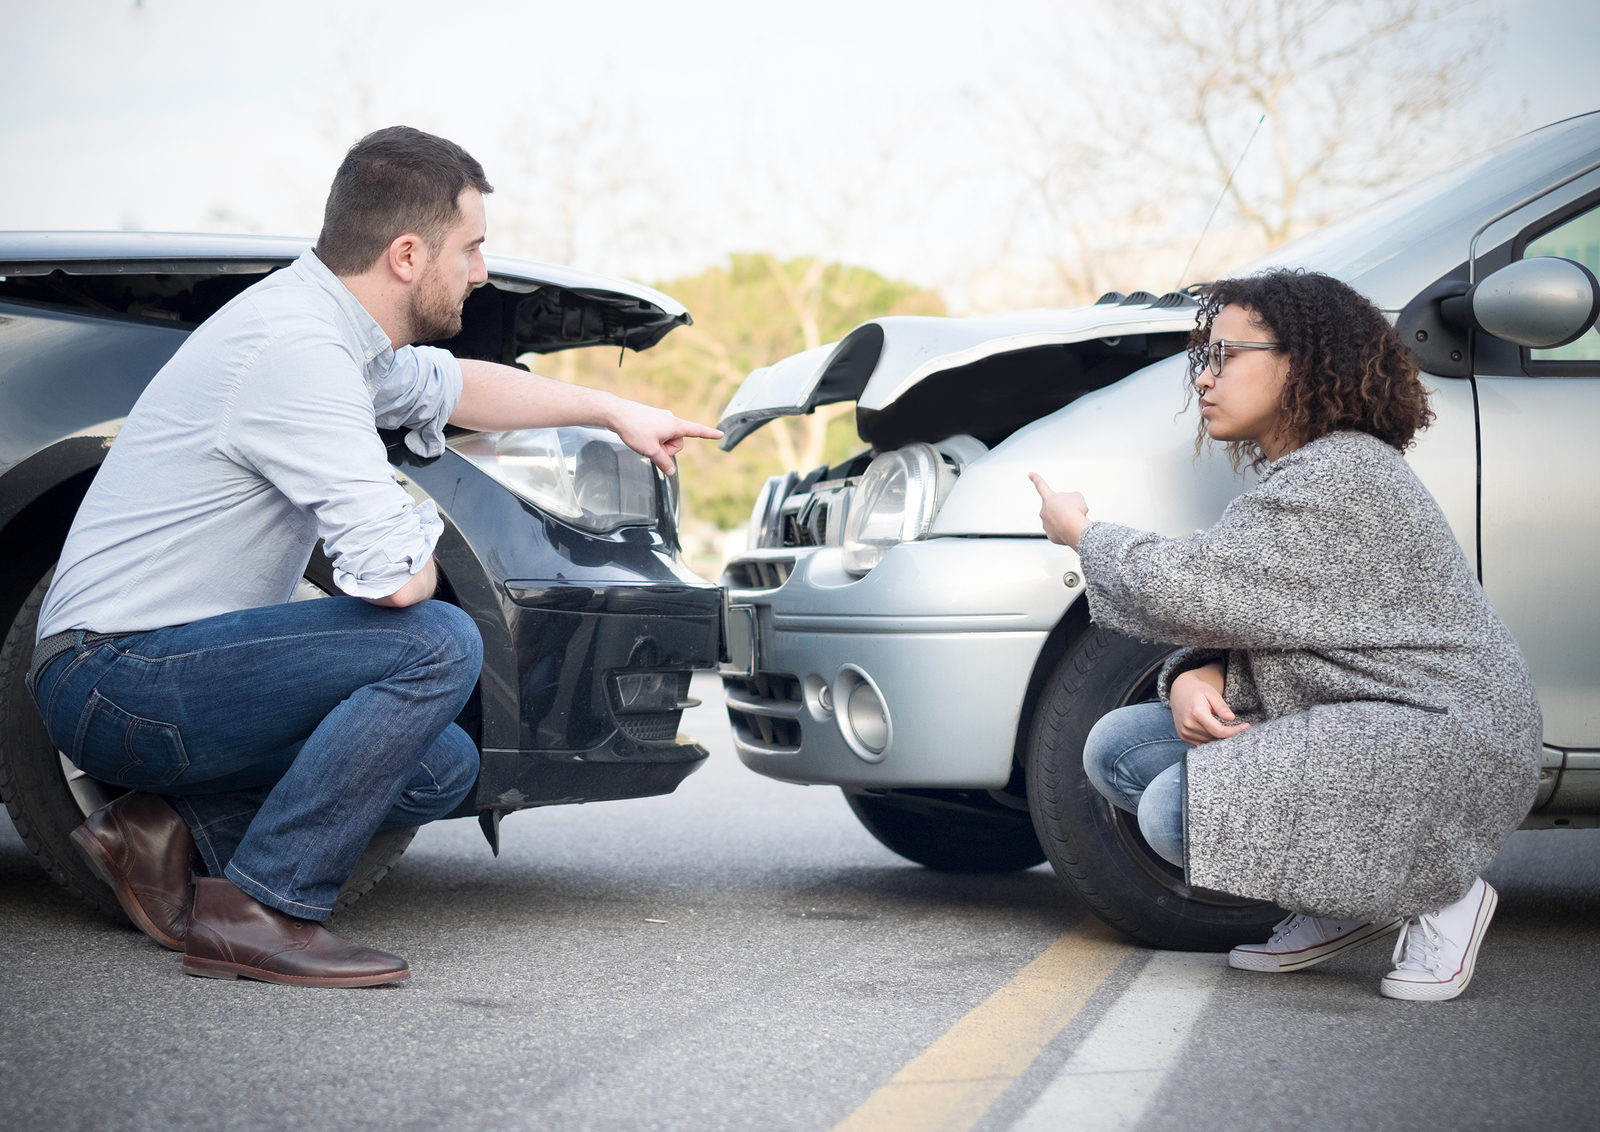 When Should I Hire A Charleston, West Virginia Personal Injury Lawyer?